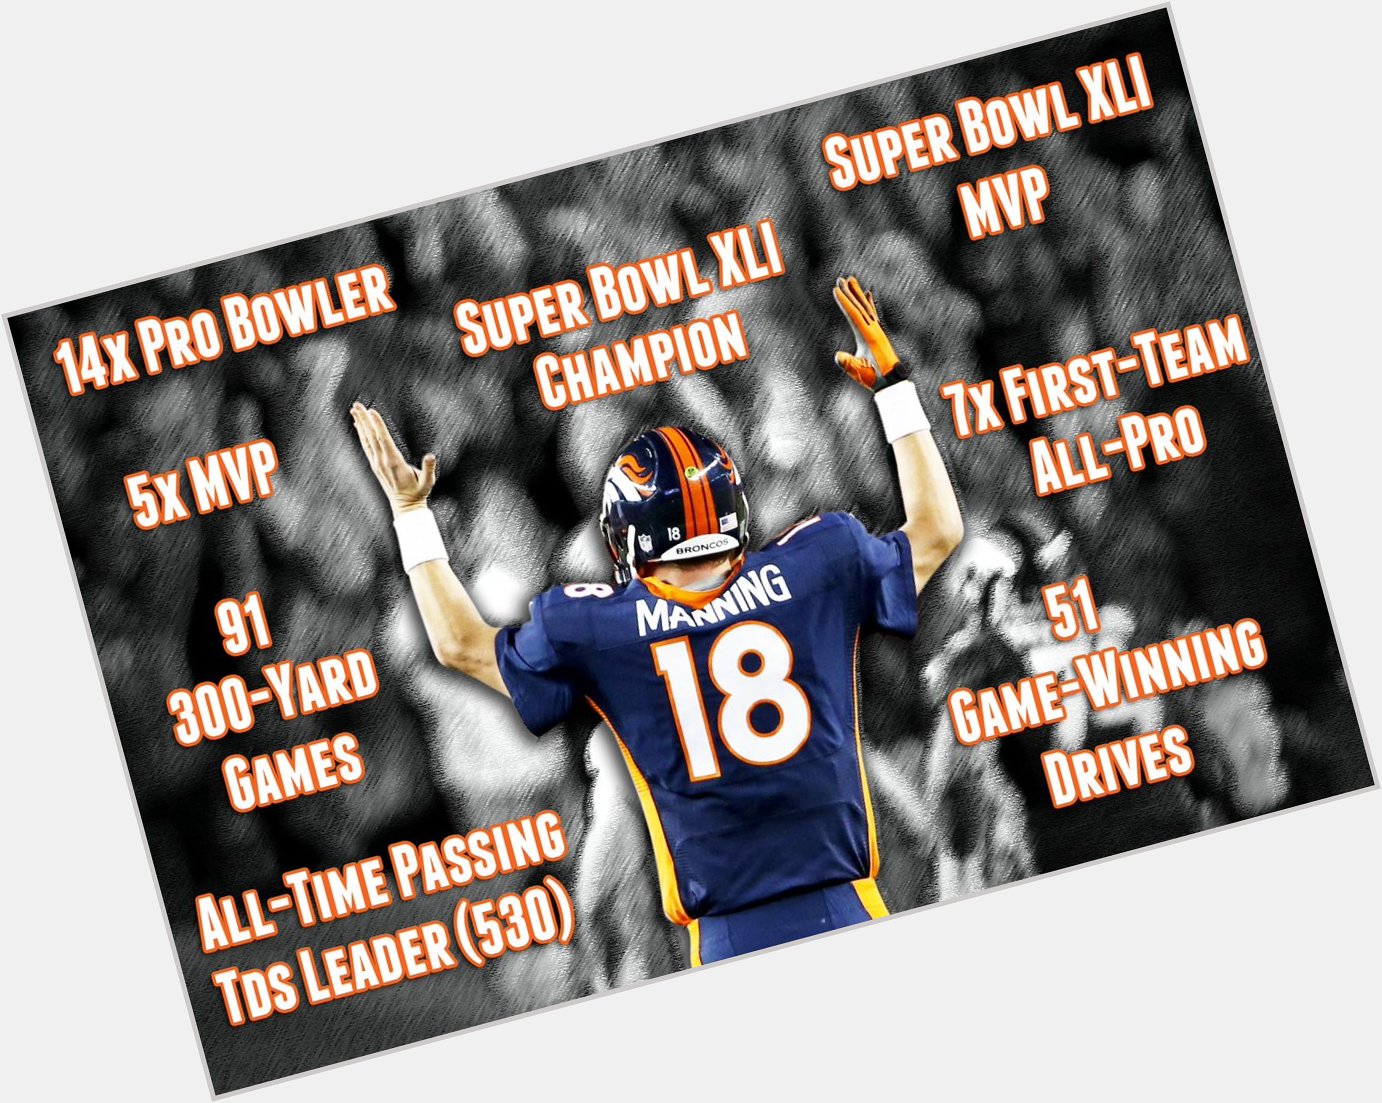 \" One of the greatest QBs to ever play regular seasons turns 39 today. 

Happy birthday, Peyton Manning. 